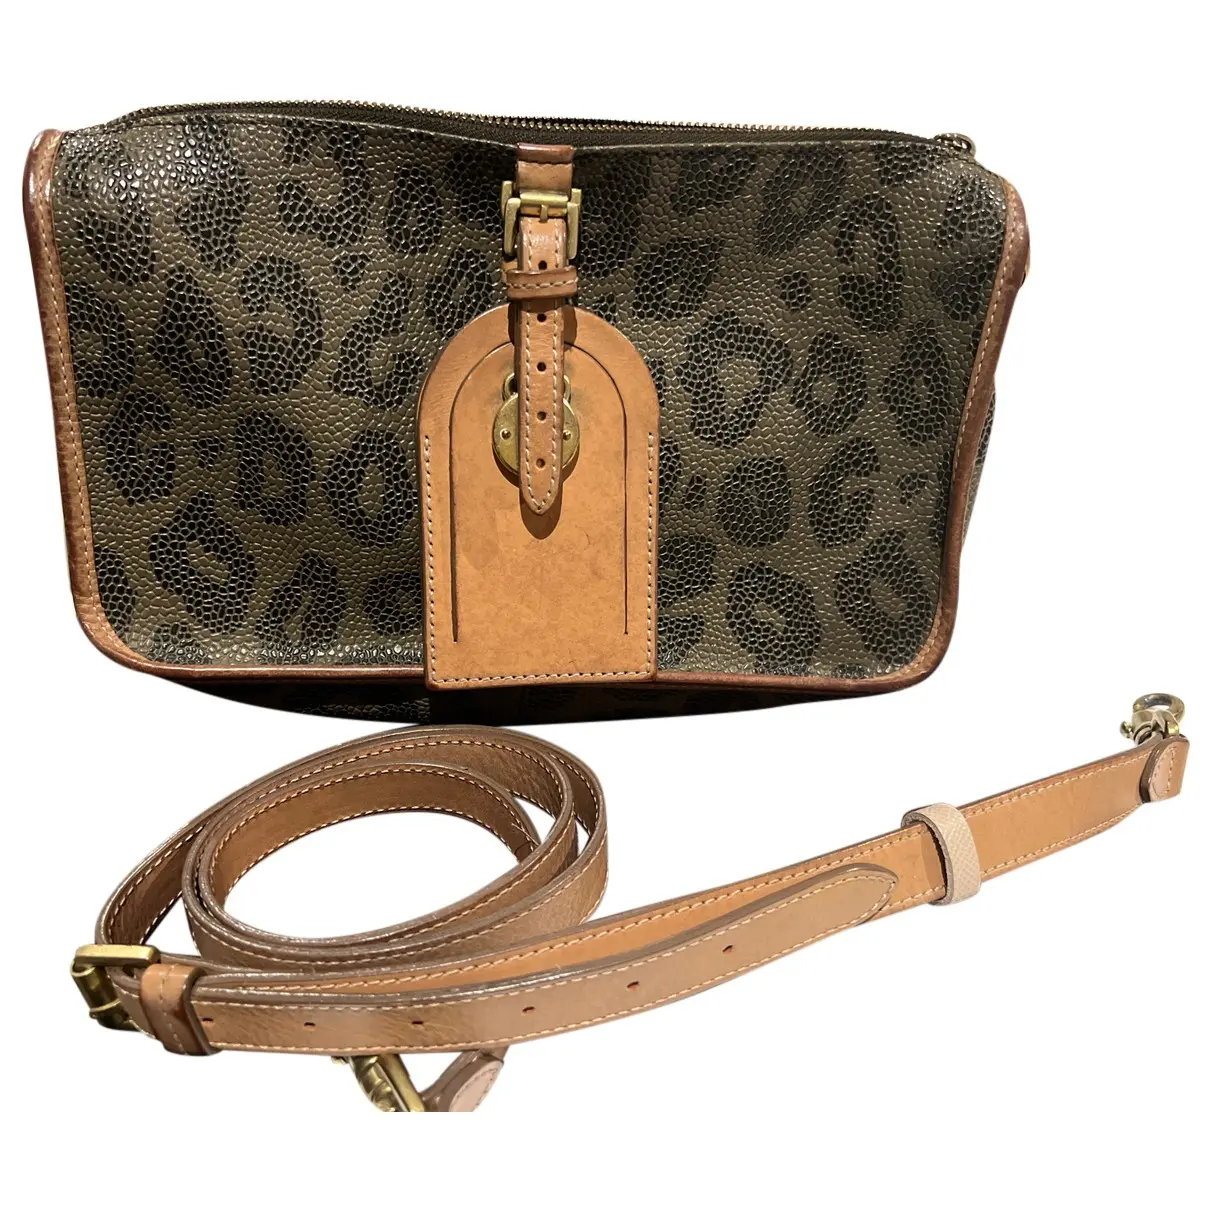 Leopard leather crossbody bag Mulberry